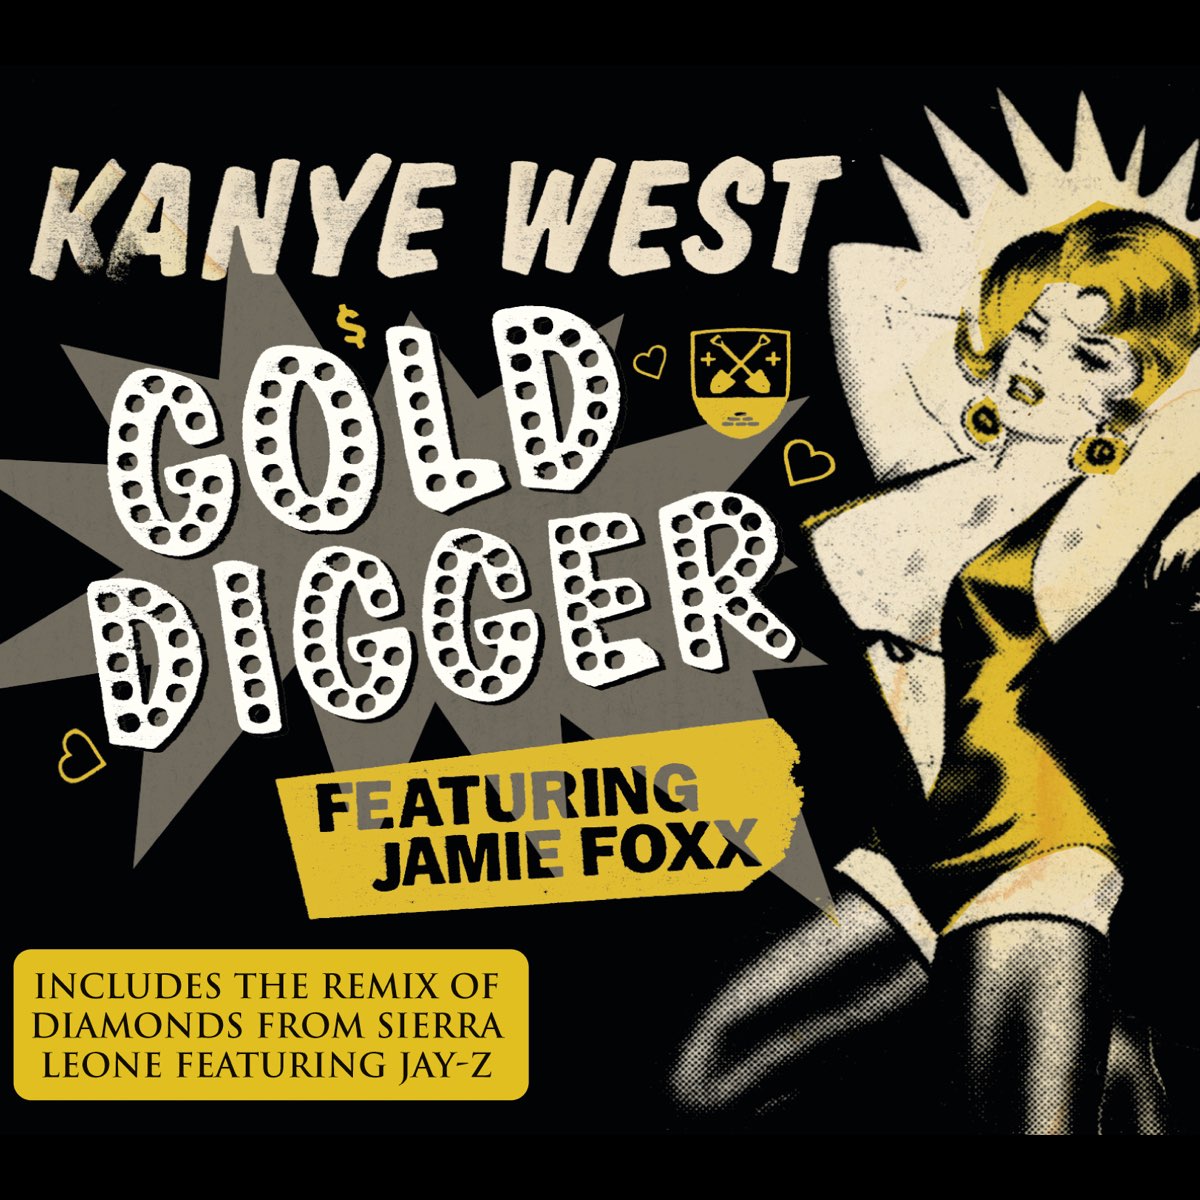 Download Gold Digger 2023 Songs, Albums, Music Video & Mixtapes